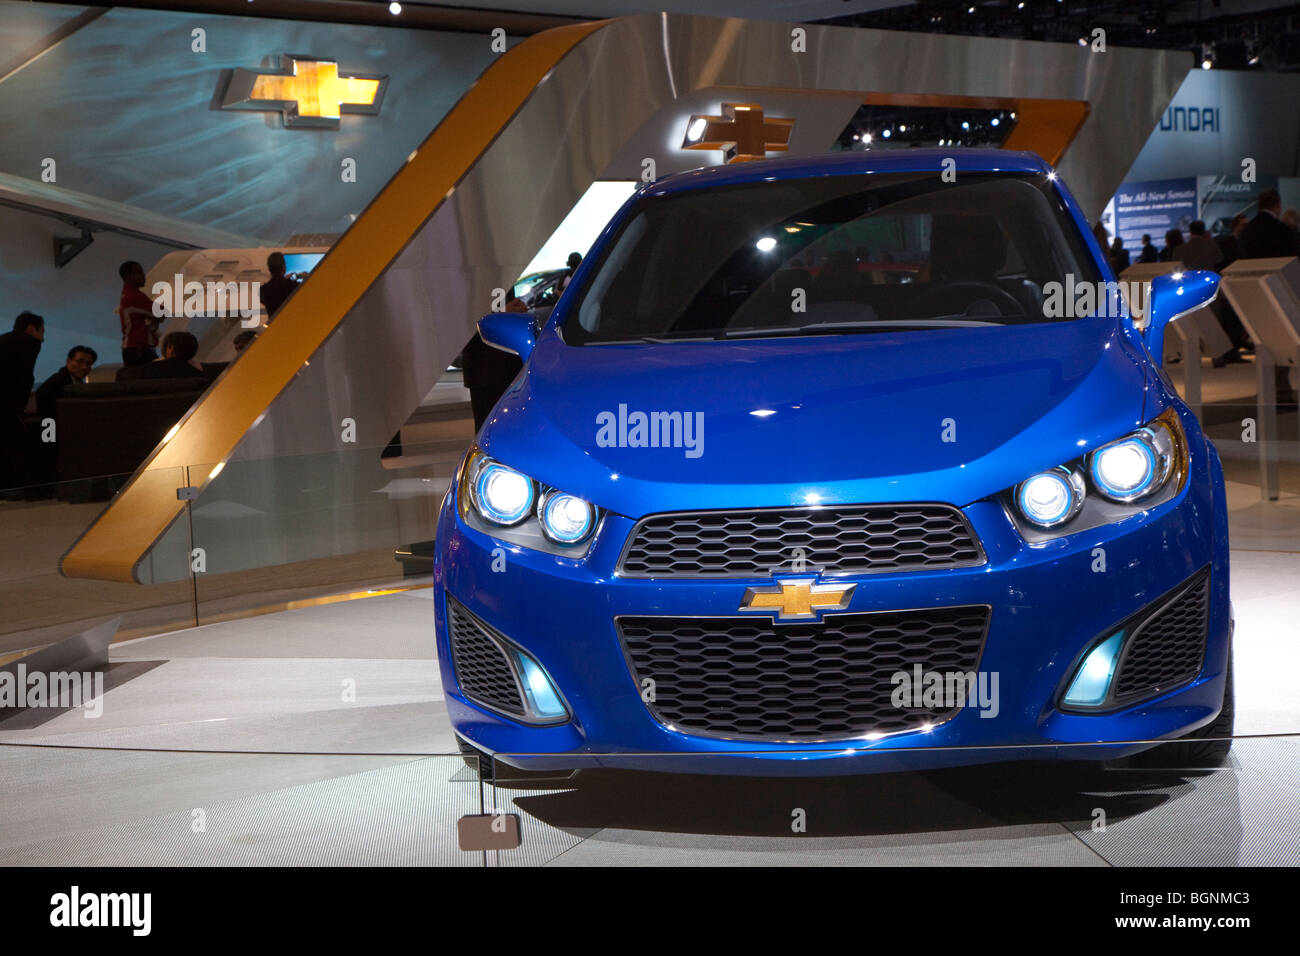 Detroit, Michigan - The Chevrolet Aveo RS concept car on display at the 2010 North American International Auto Show. Stock Photo